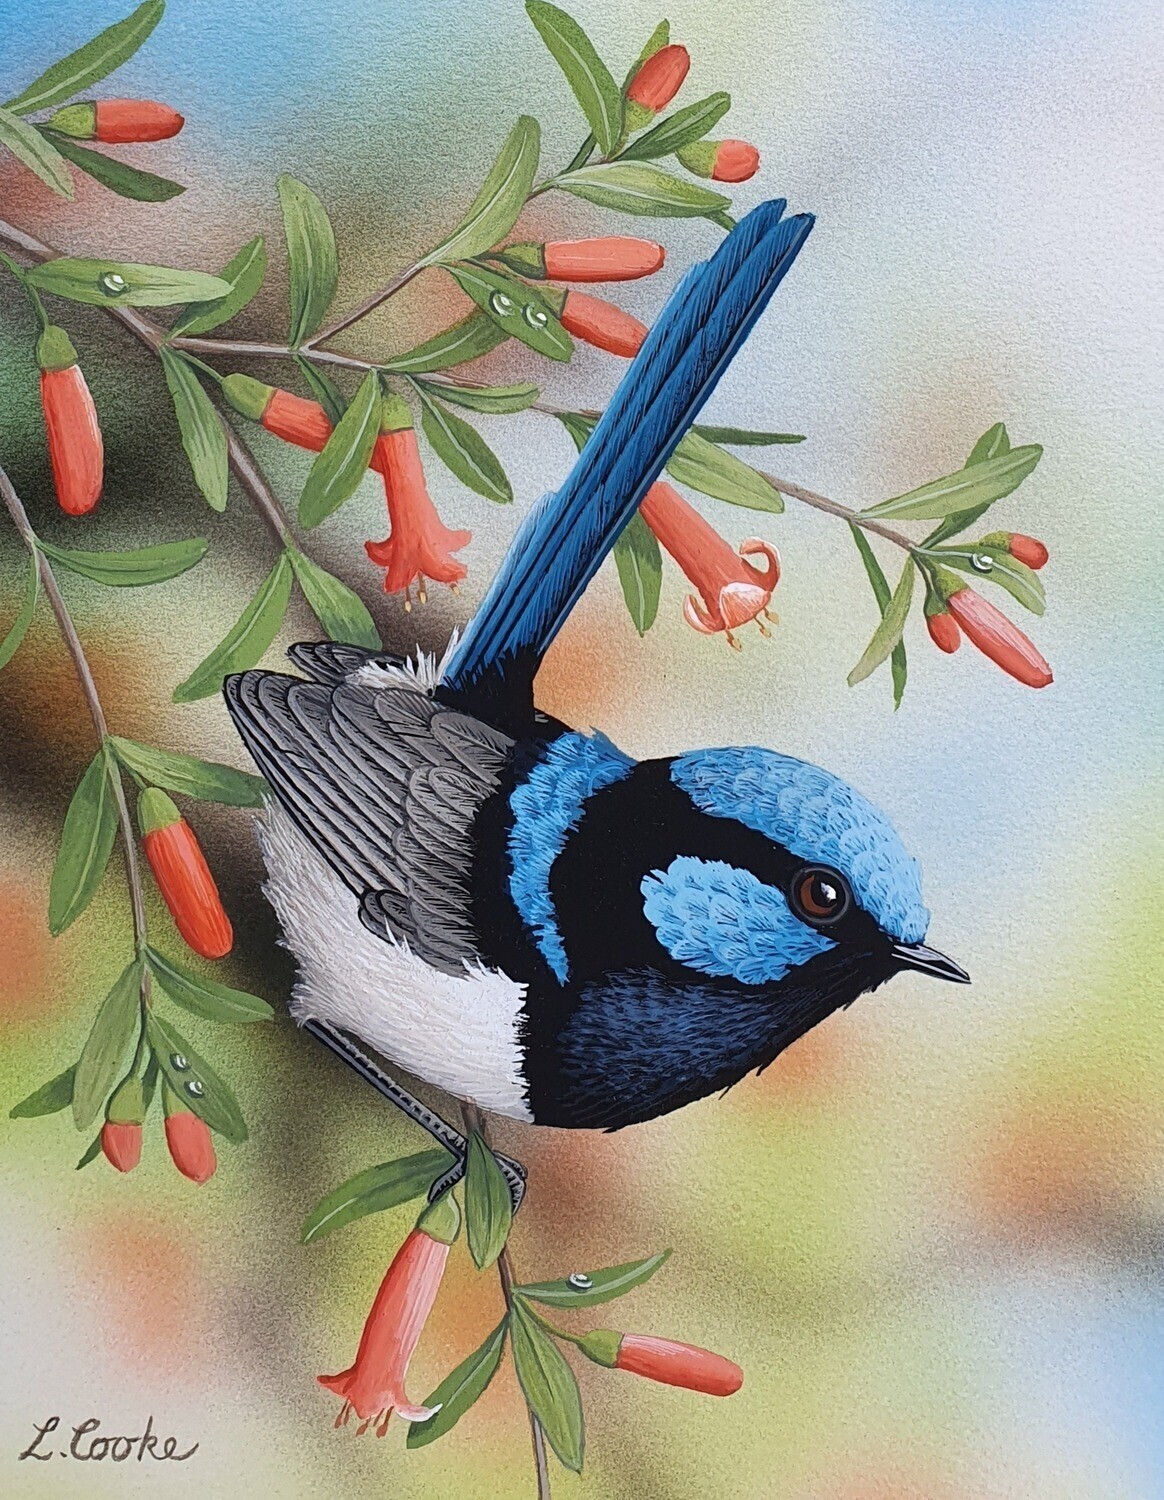 Superb Wren by Lyn Cooke - 30 x 40cm Full Drill (Round) Diamond Painting Kit - Currently in stock